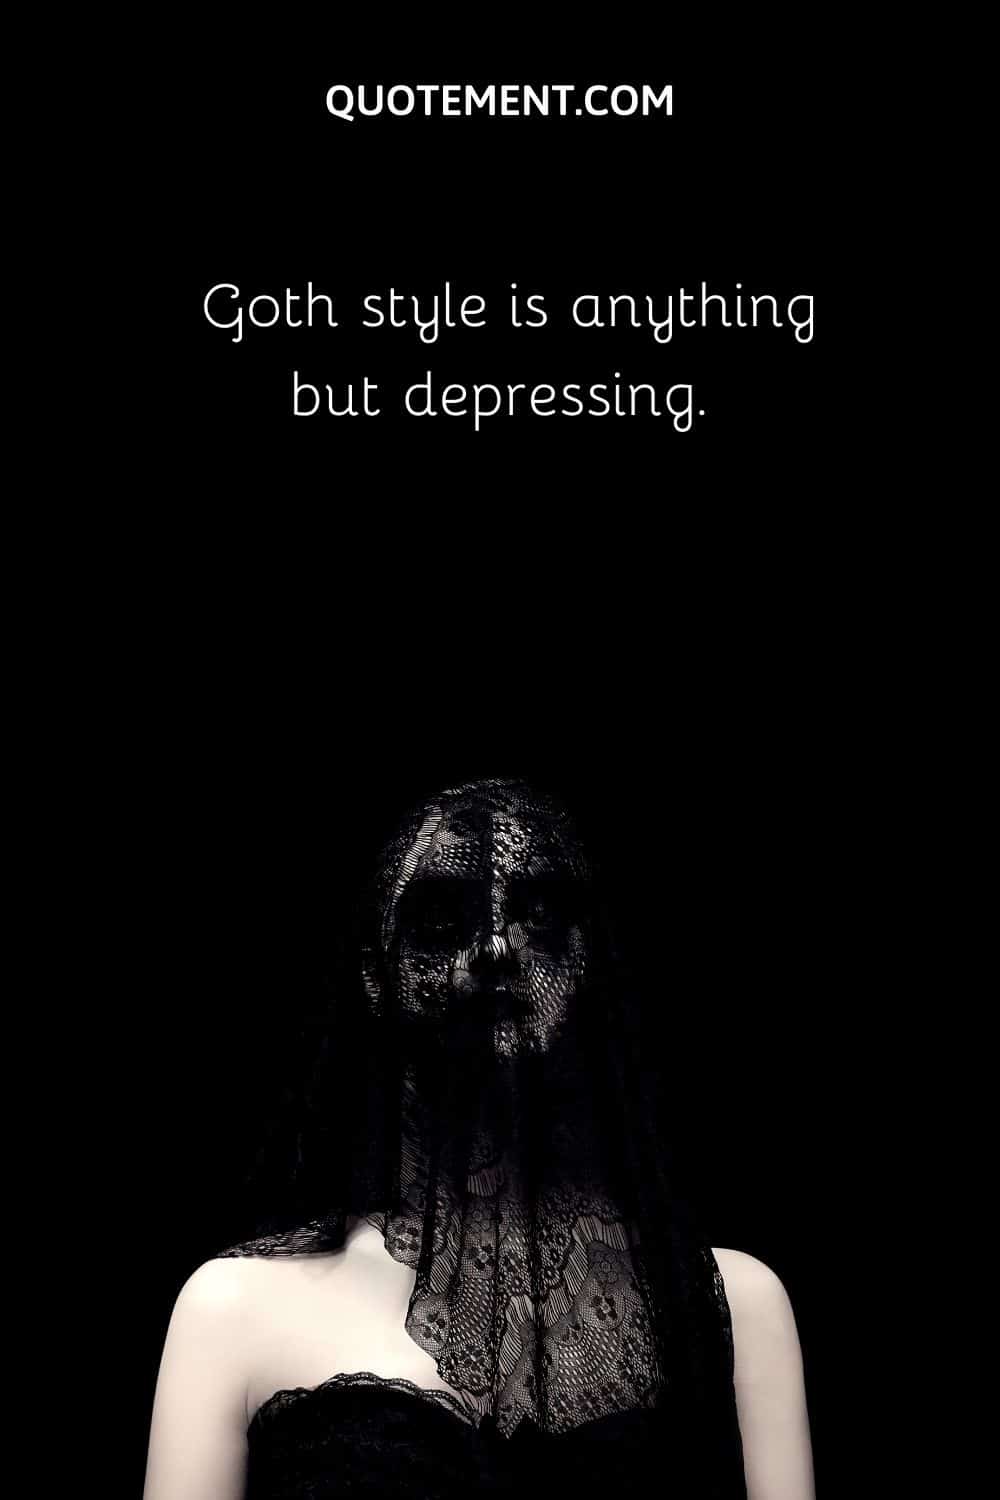 Goth style is anything but depressing